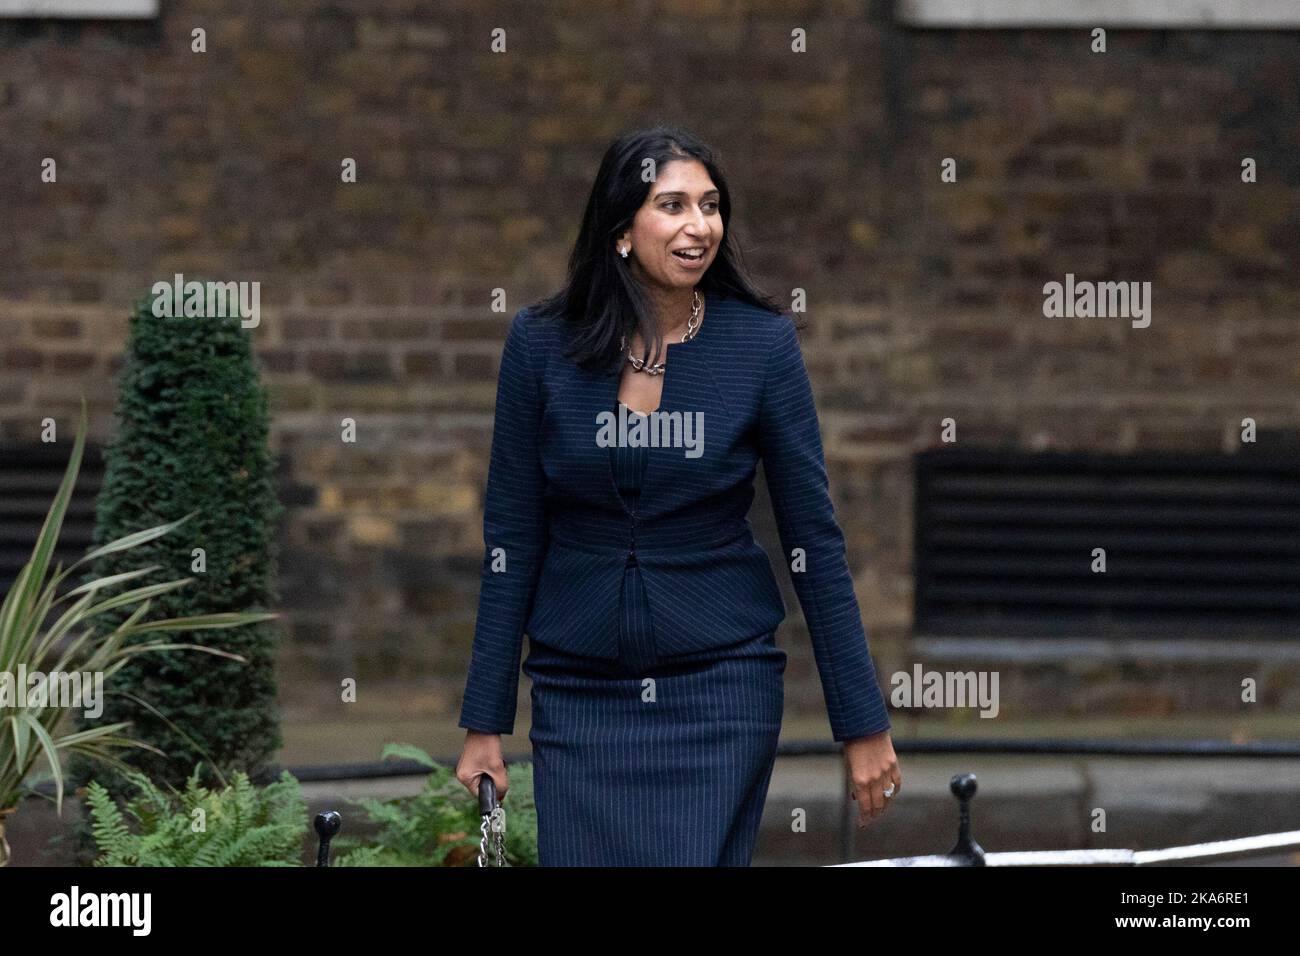 Suella Braverman arrives at Downing Street this afternoon as Prime Minister Rishi Sunk appoints his cabinet ministers.   Image shot on Stock Photo